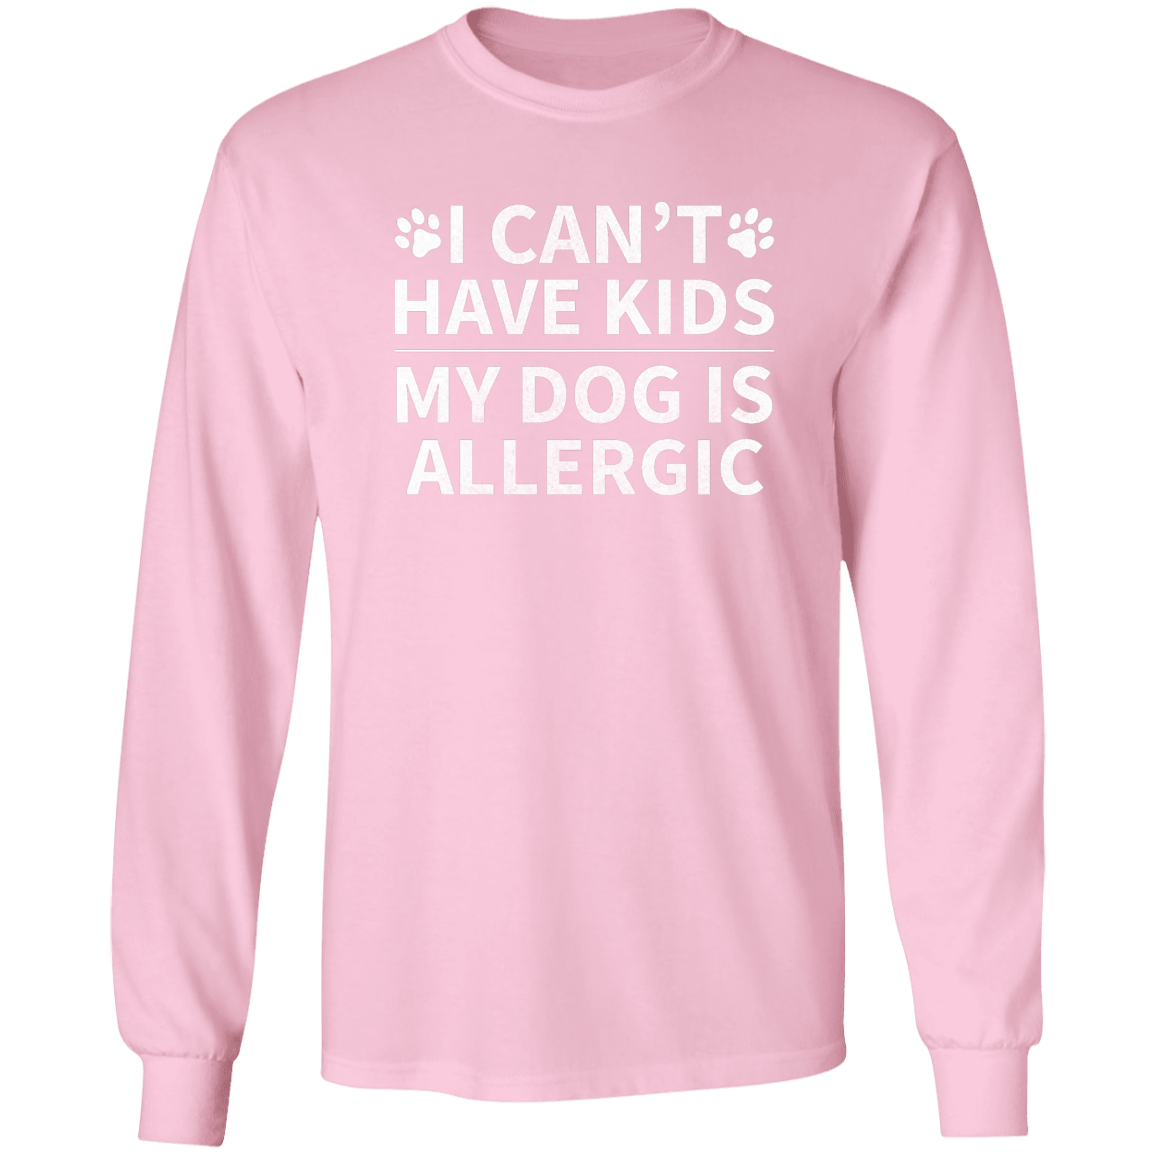 My Dog Is Allergic - Long Sleeve T Shirt.